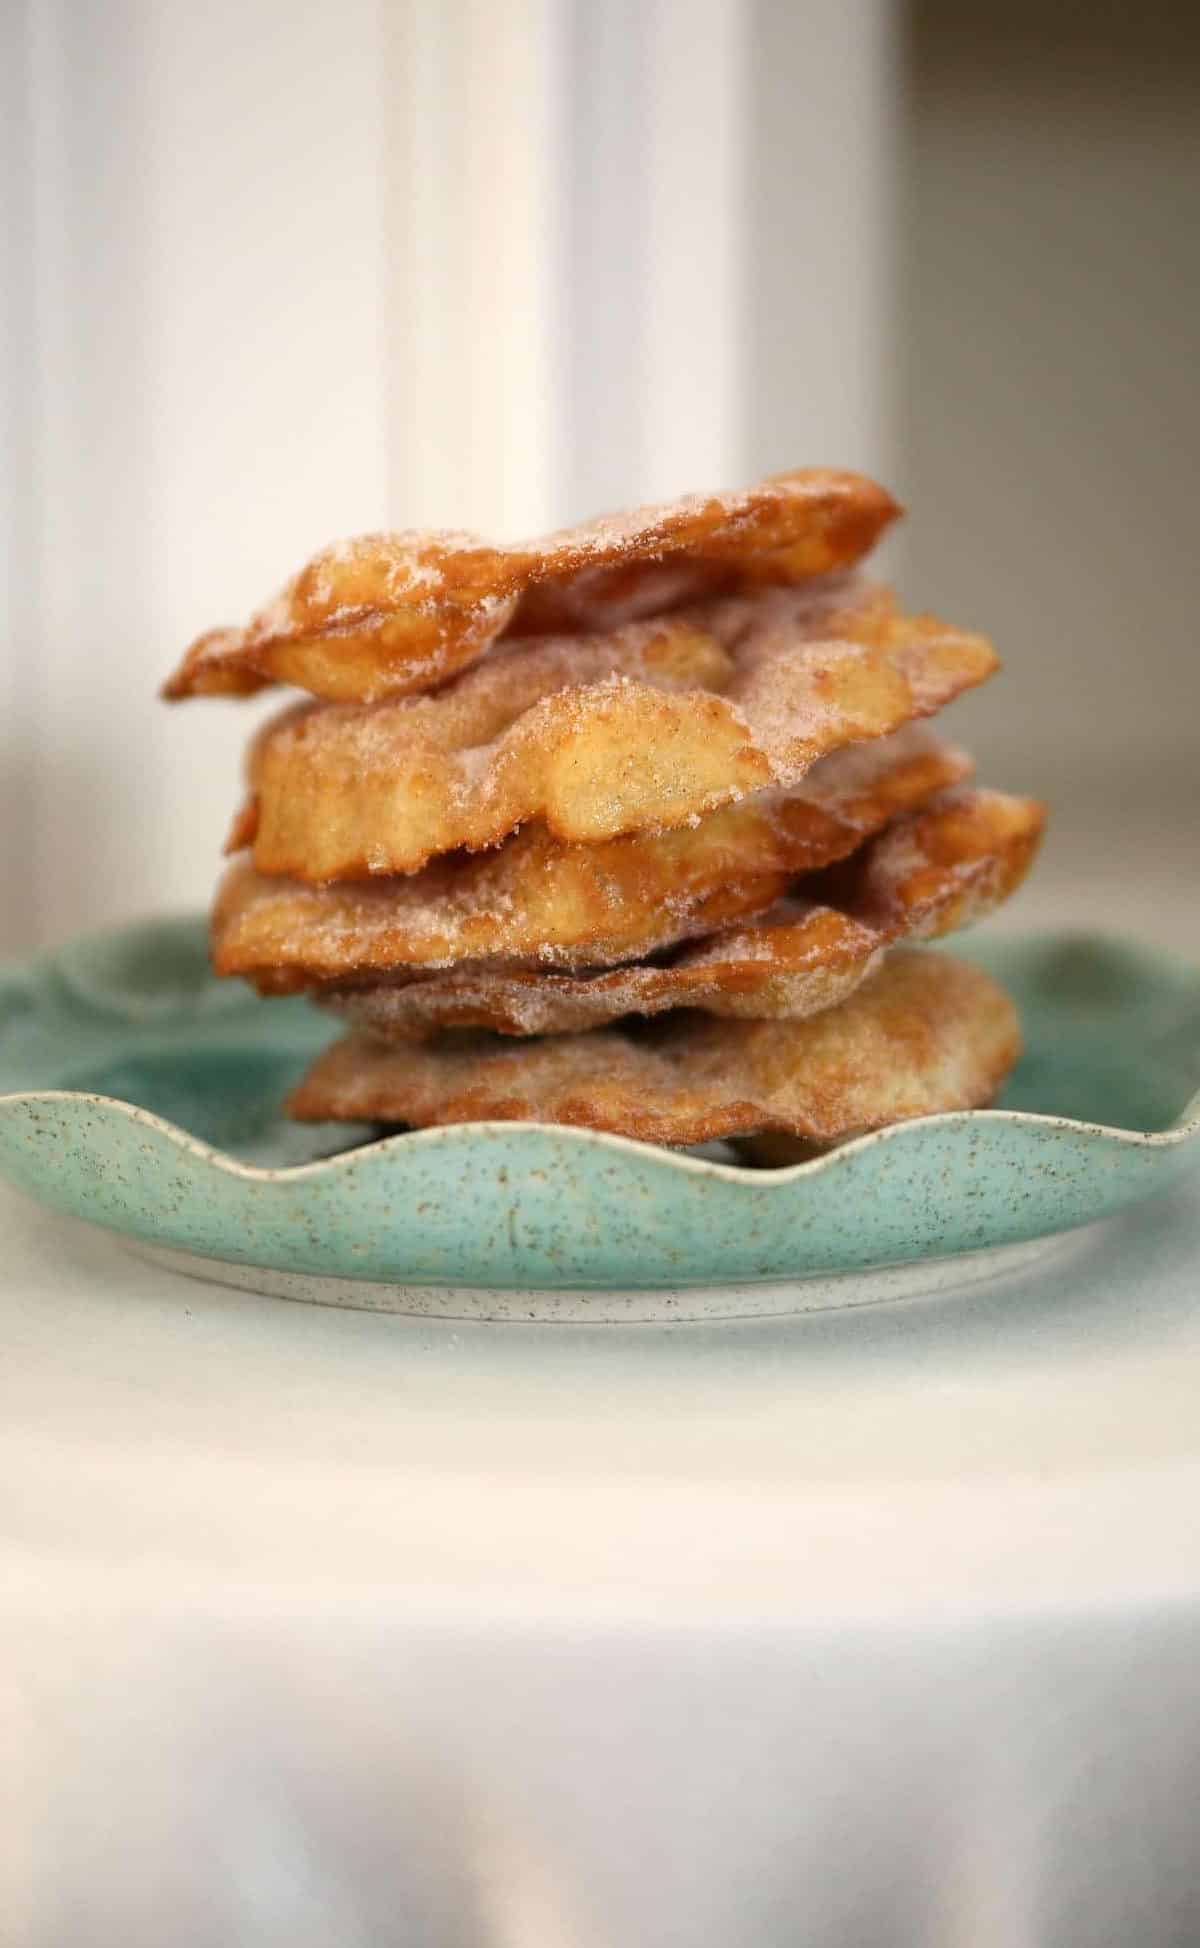  These bunuelos are best served warm with a cup of coffee or hot chocolate.